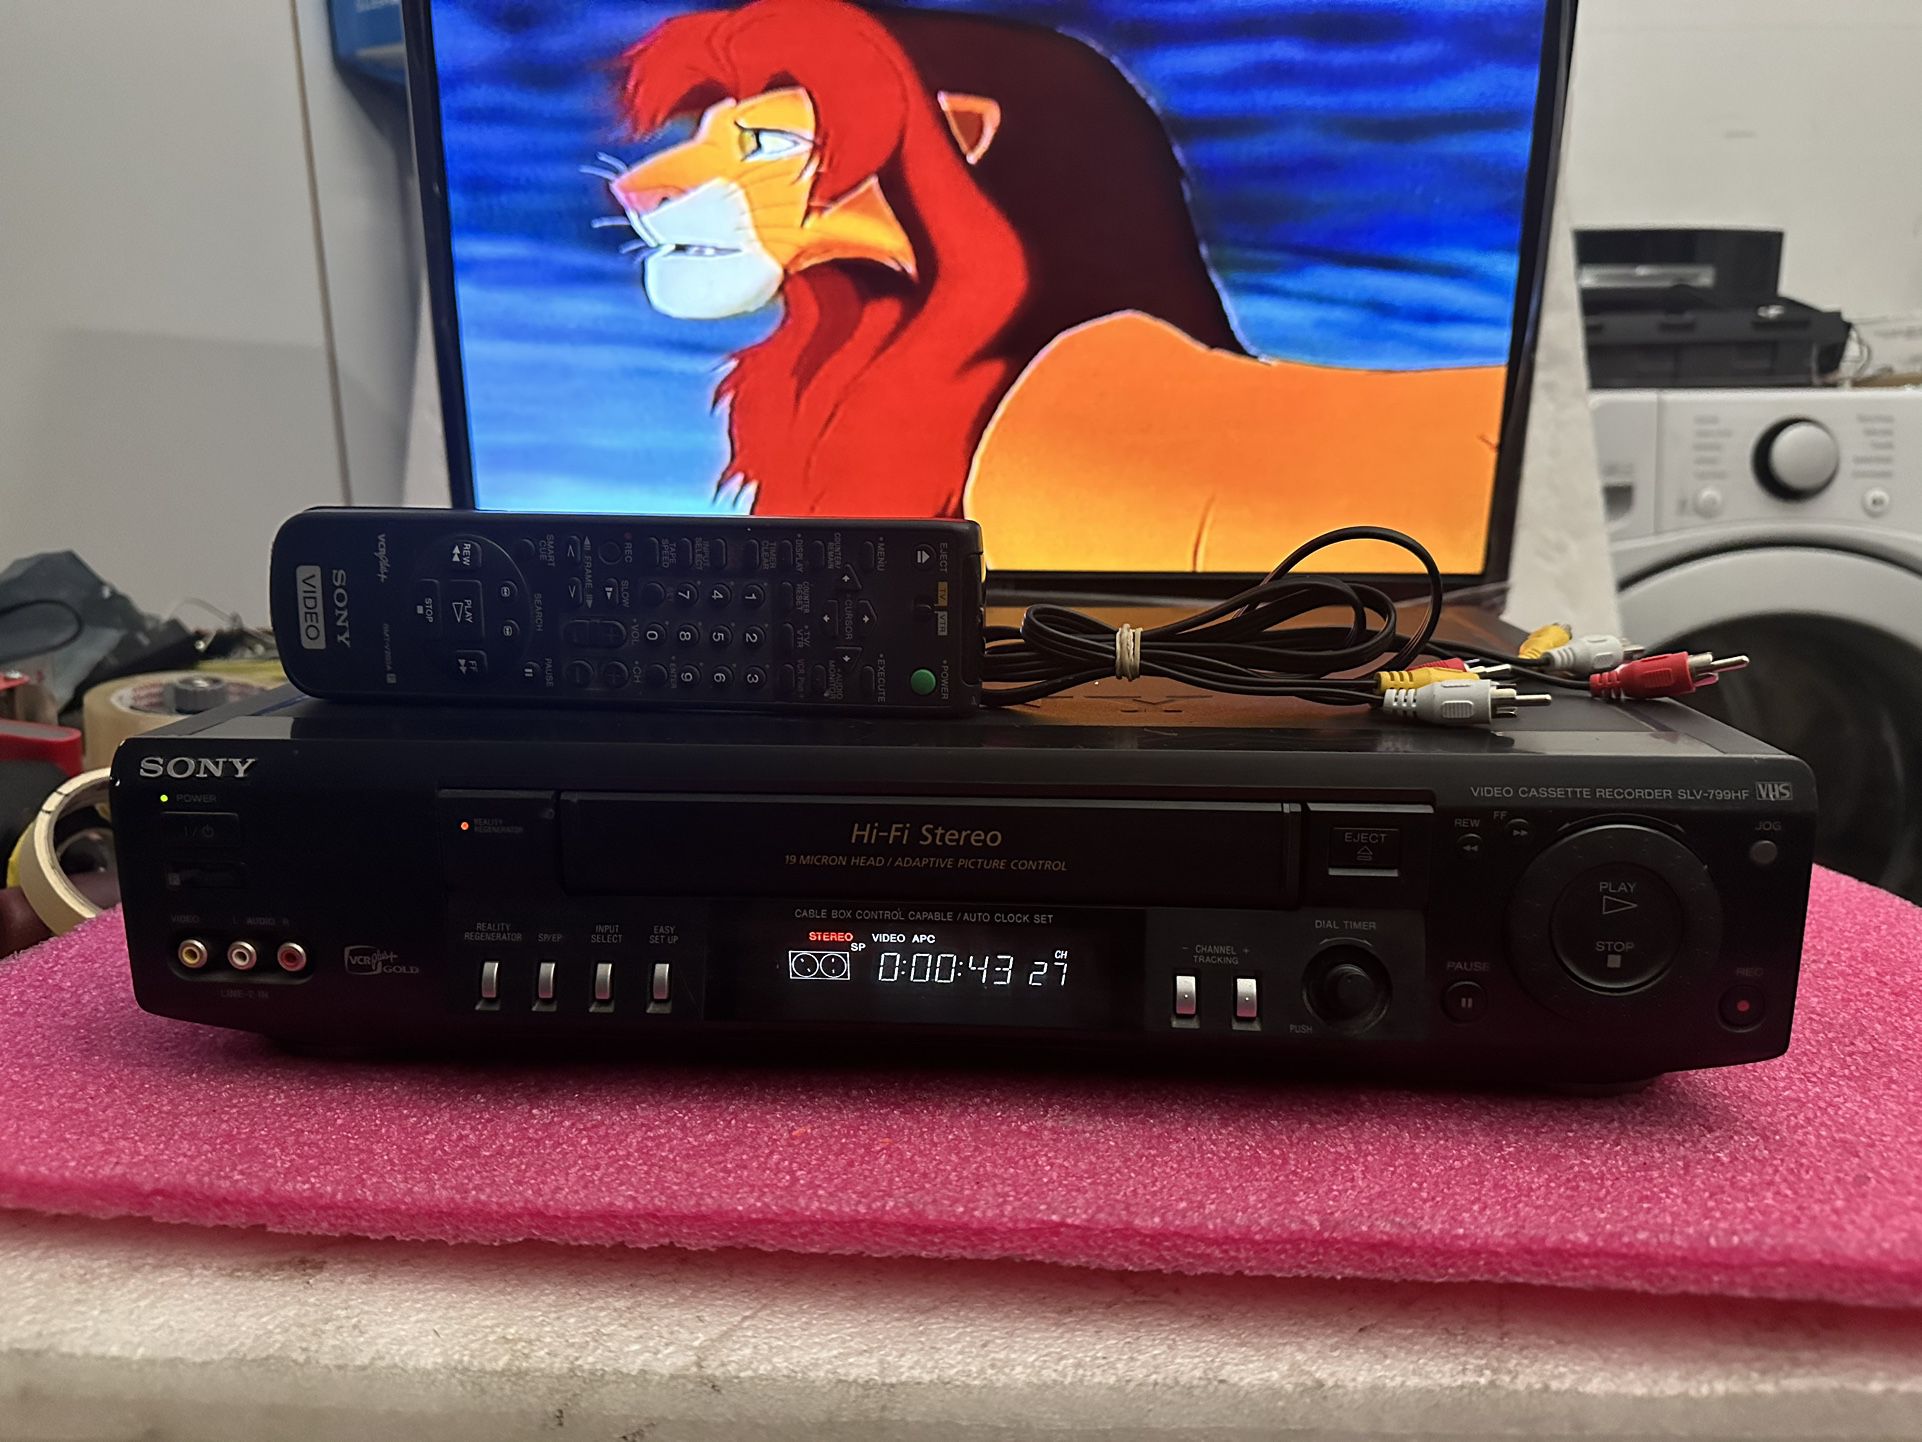 SONY SLV-790HF VCR VHS 4 HEAD HI-FI STEREO VHS PLAYER WITH REMOTE  AND AV CABLES 